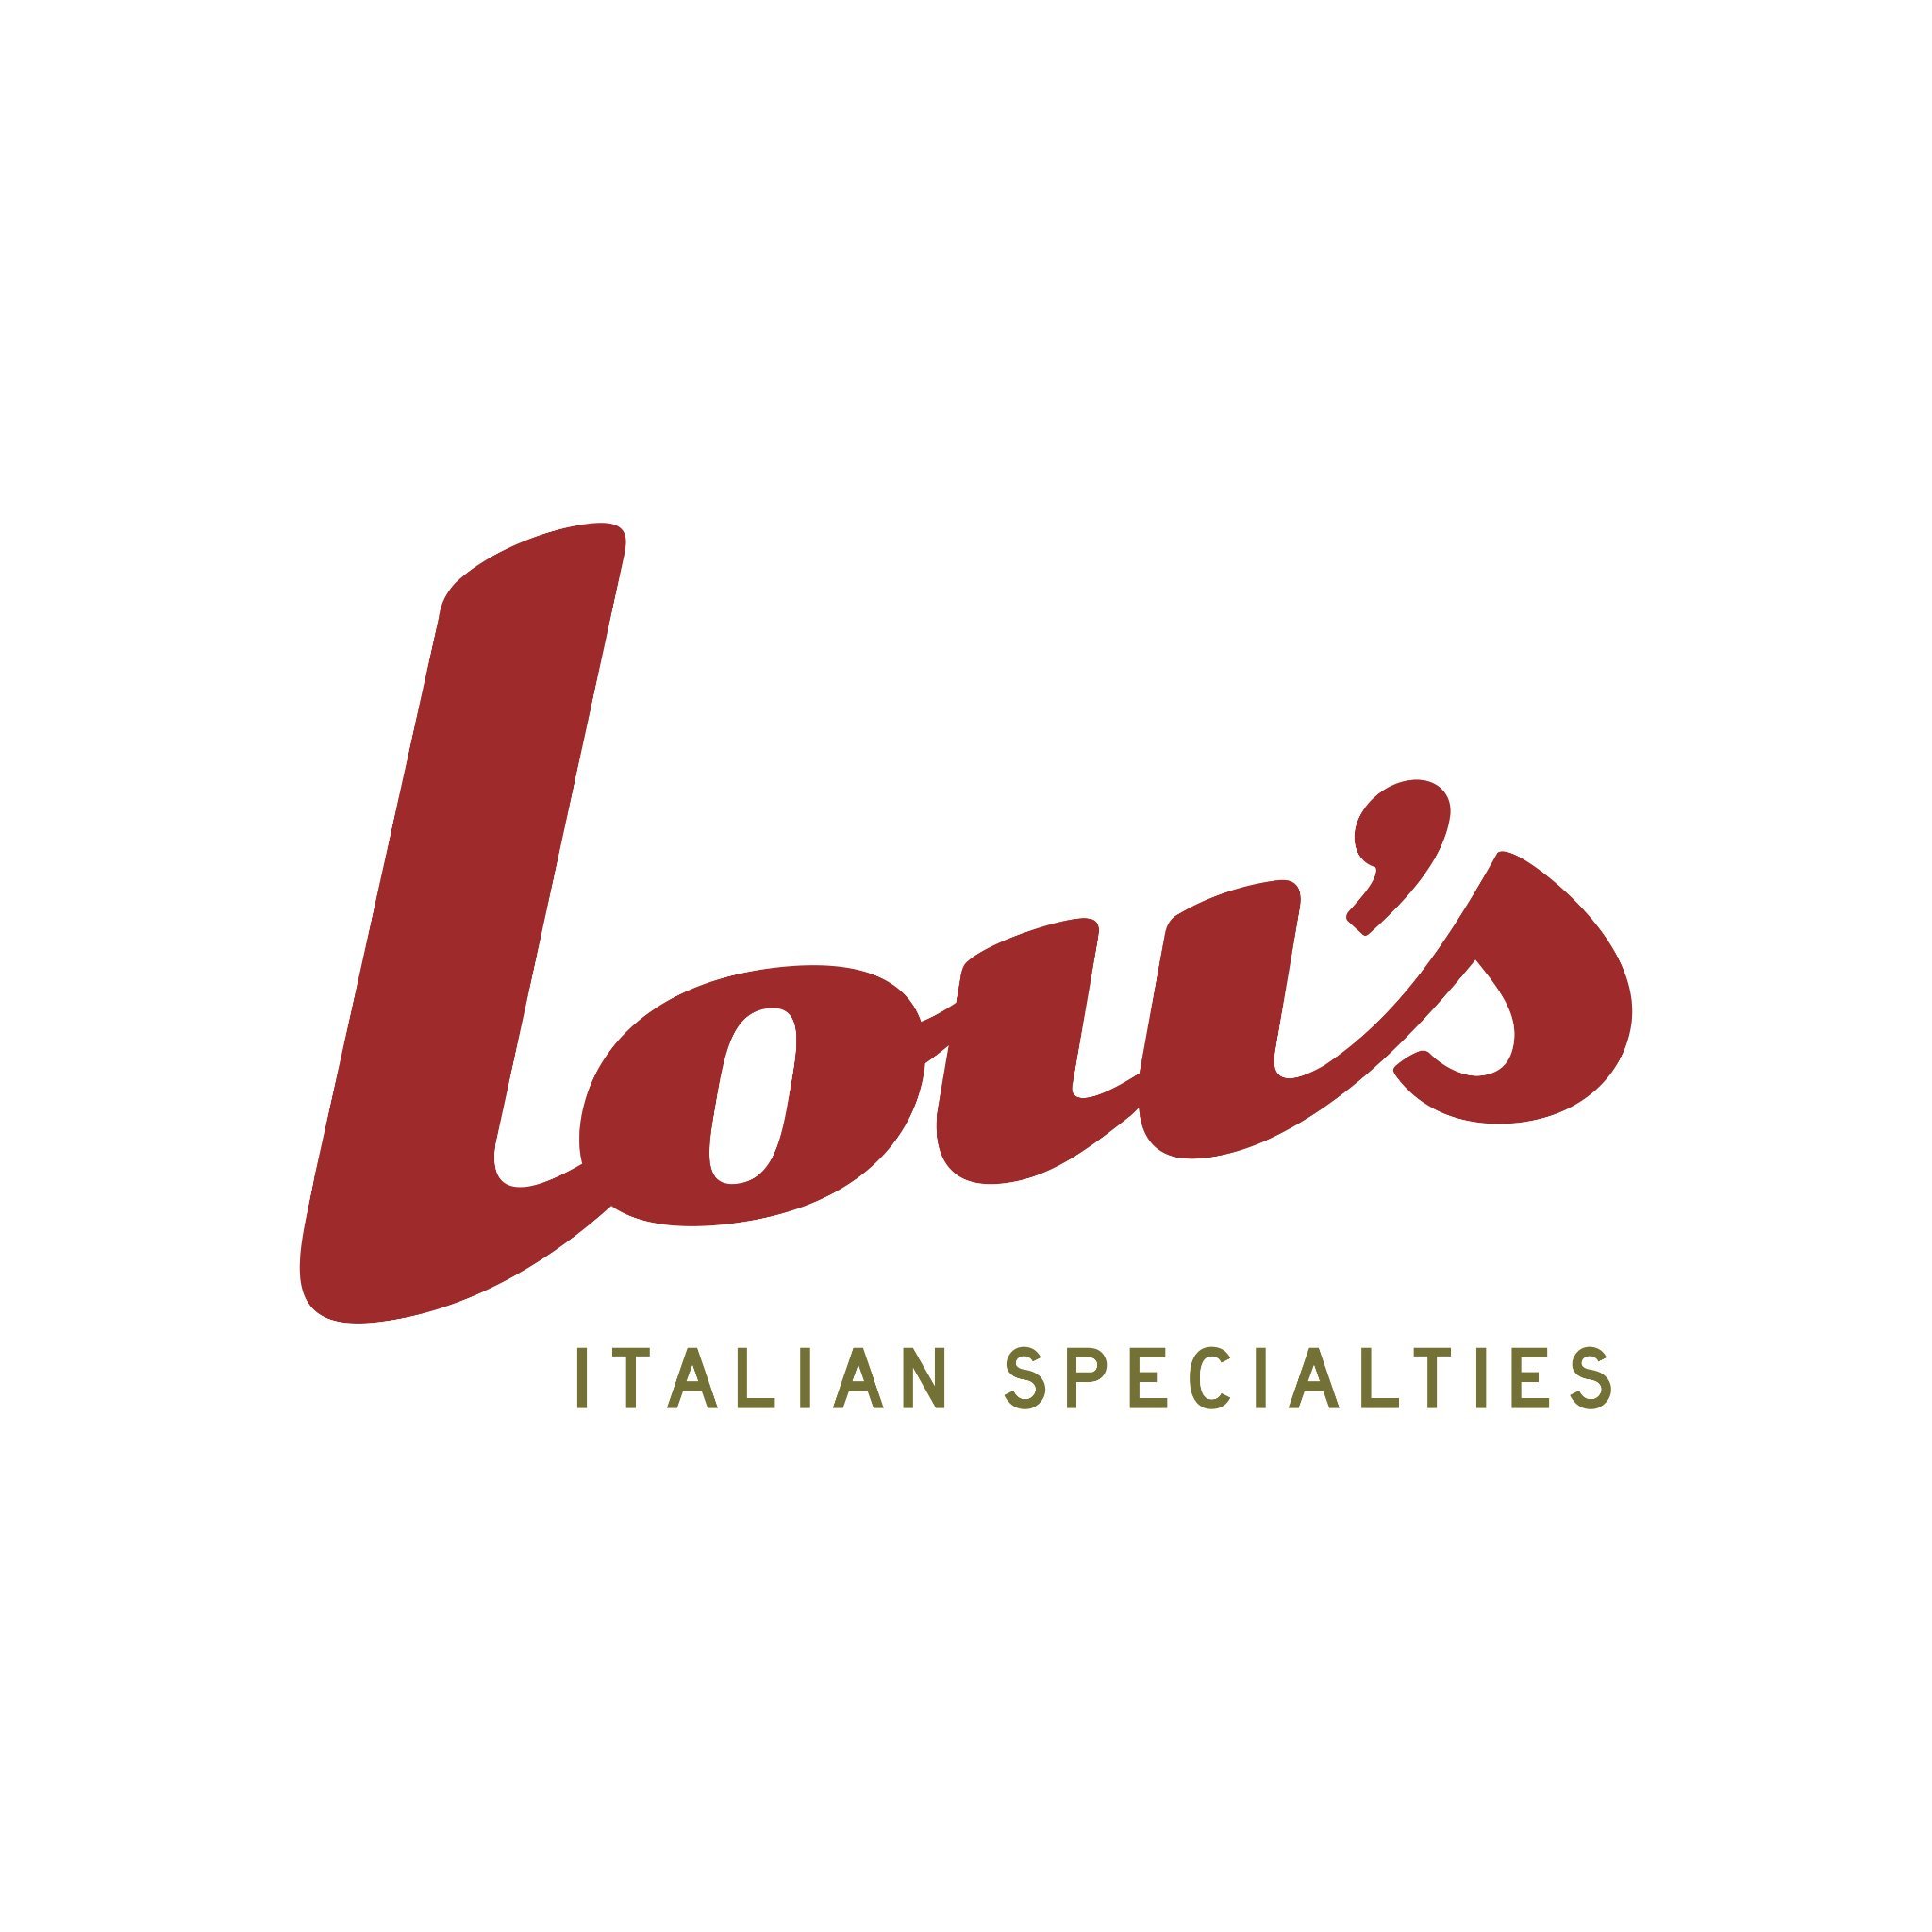 From the team behind @rosenbergsbagel and @famousjspizza, Lou’s Italian is now open and serving up NJ-style Italian deli and market fare! #lousitalian